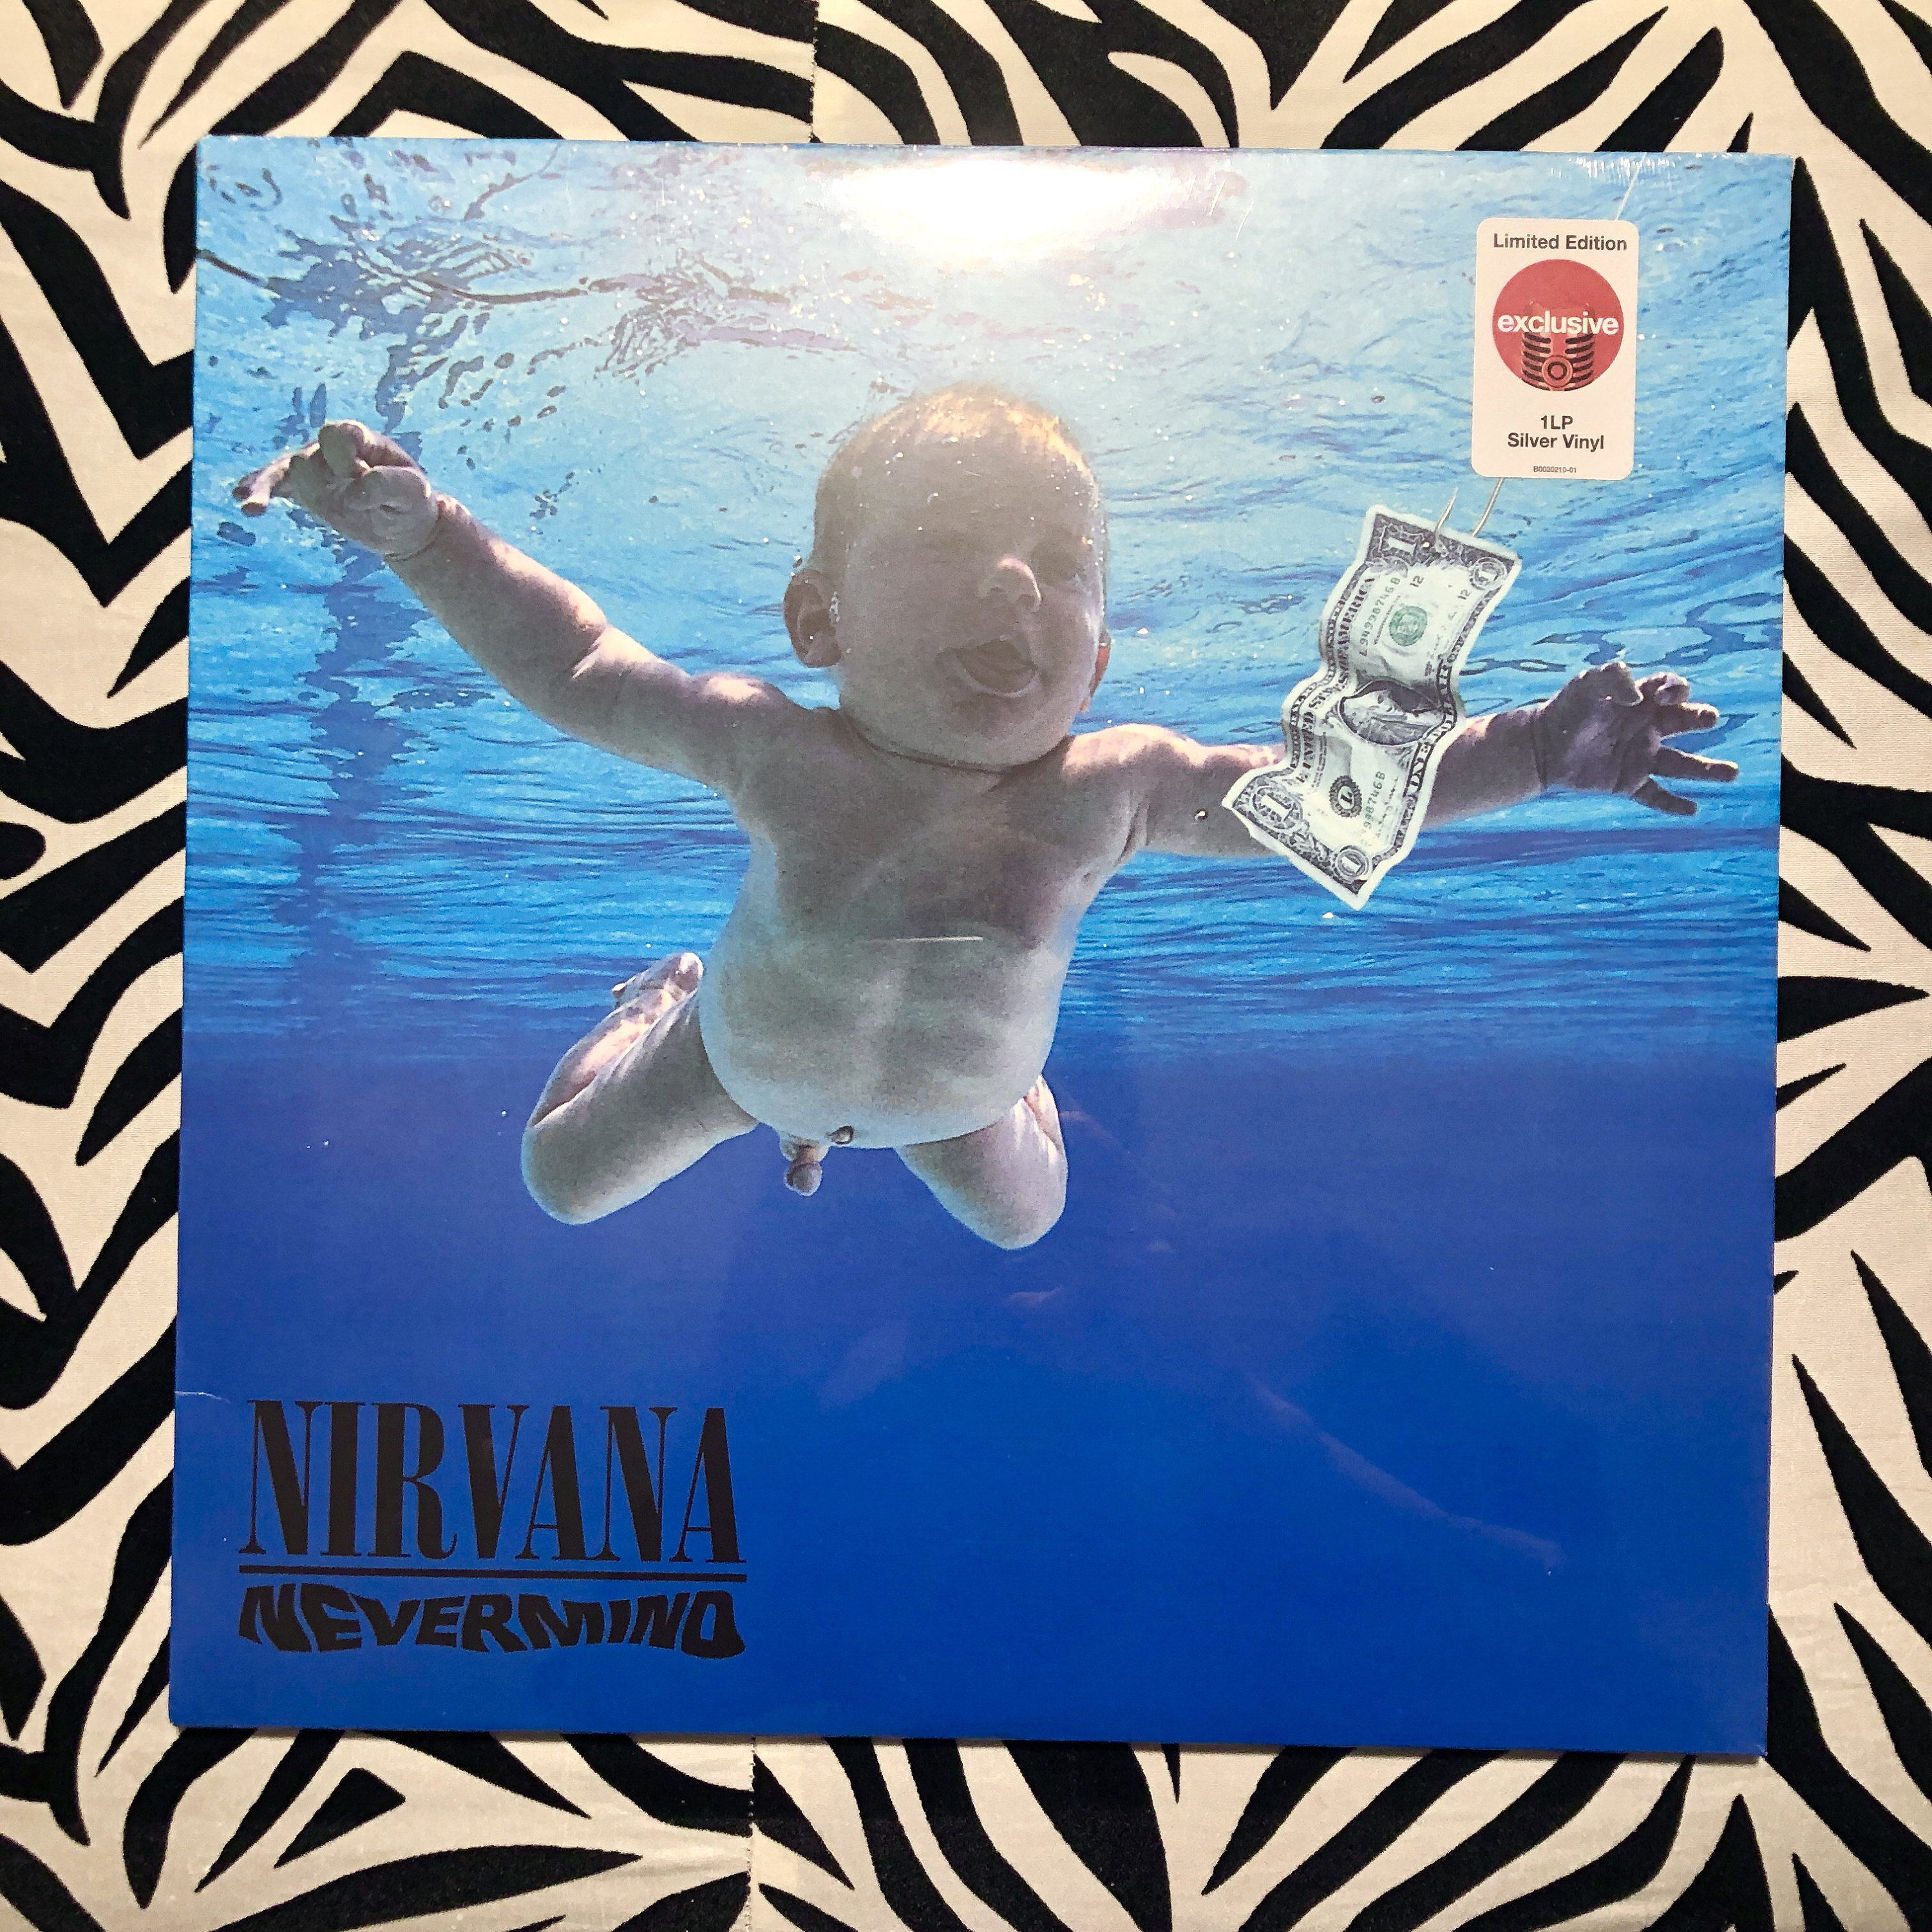 Nirvana Nevermind Limited Edition Exclusive Target Silver Vinyl Album  Record LP Sold Out OOP 